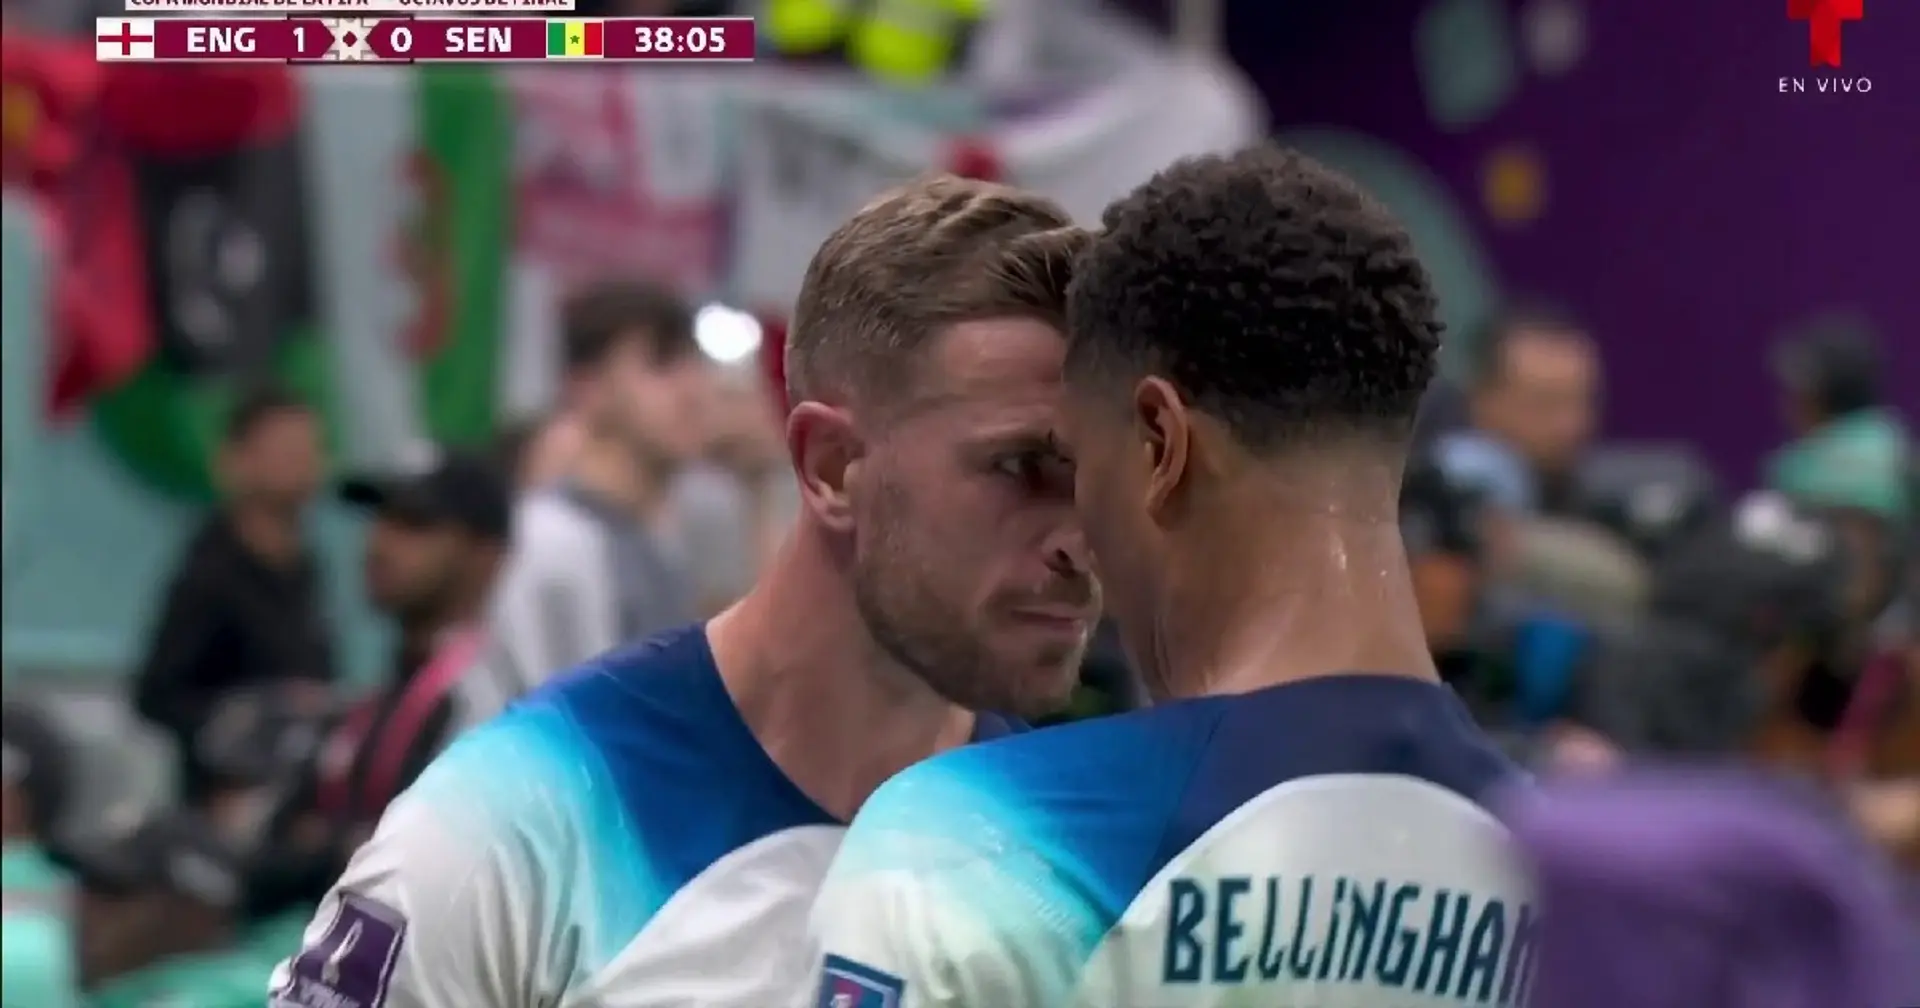 Henderson scores for England from Bellingham assist